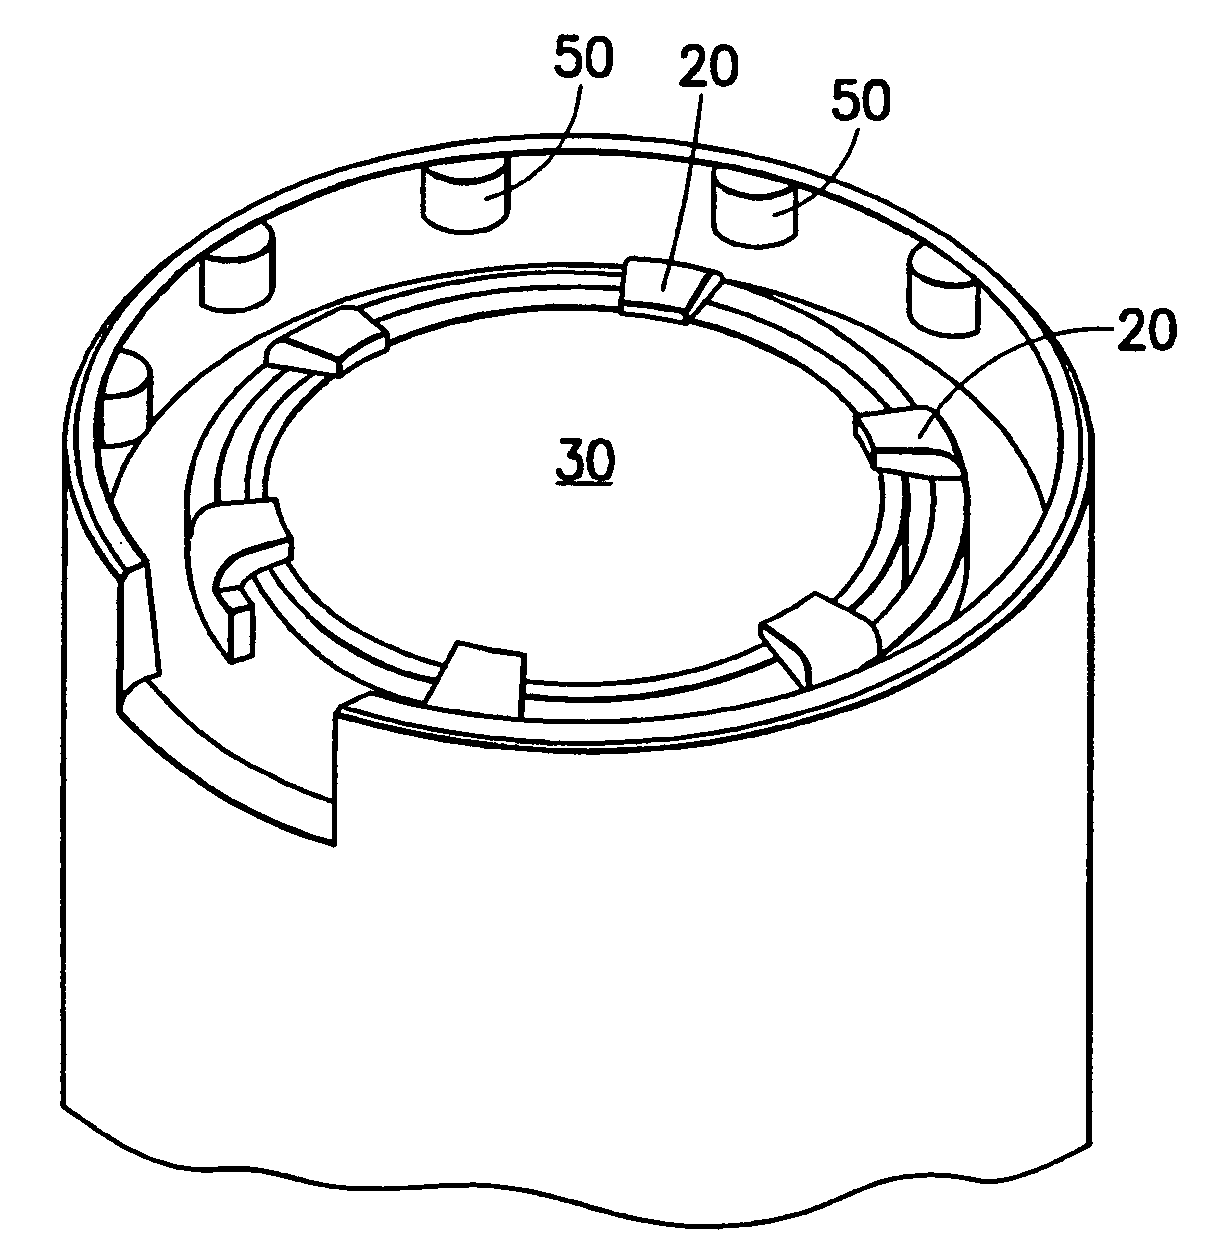 System, method, and apparatuses for maintaining, tracking, transporting and identifying the integrity of a disposable specimen container with a re-usable transponder